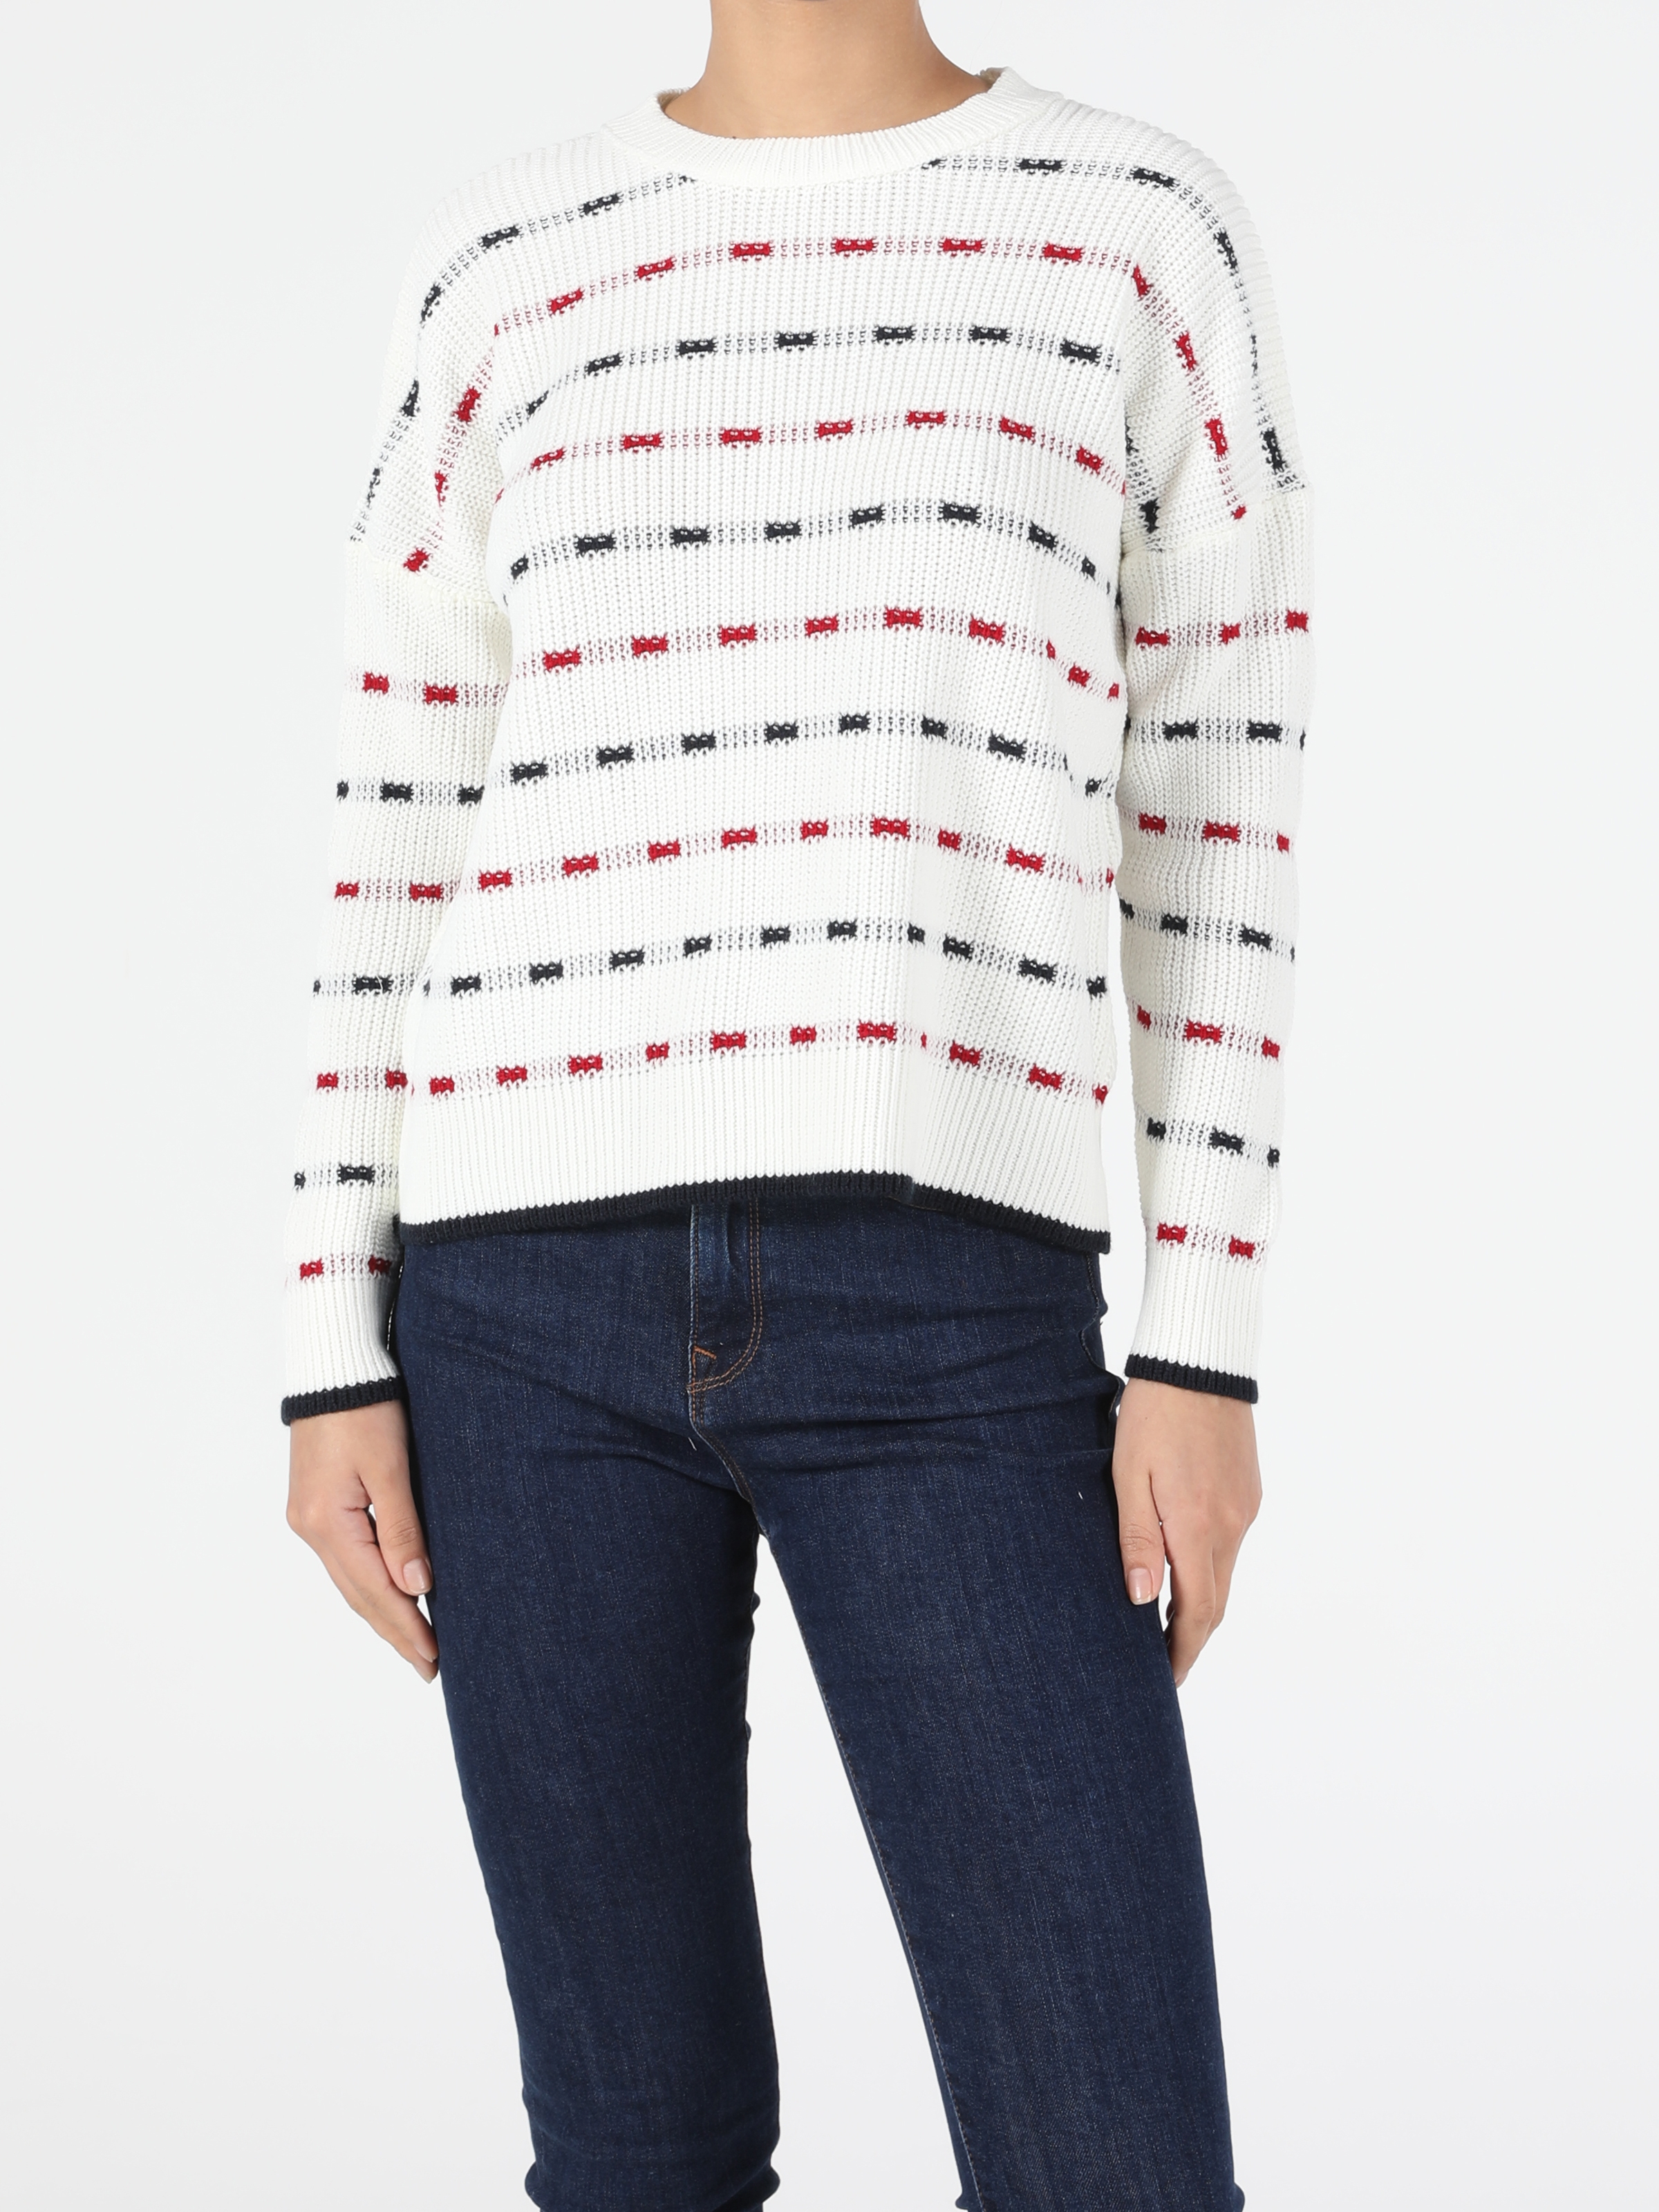 Colins Whıte Woman Sweaters. 4